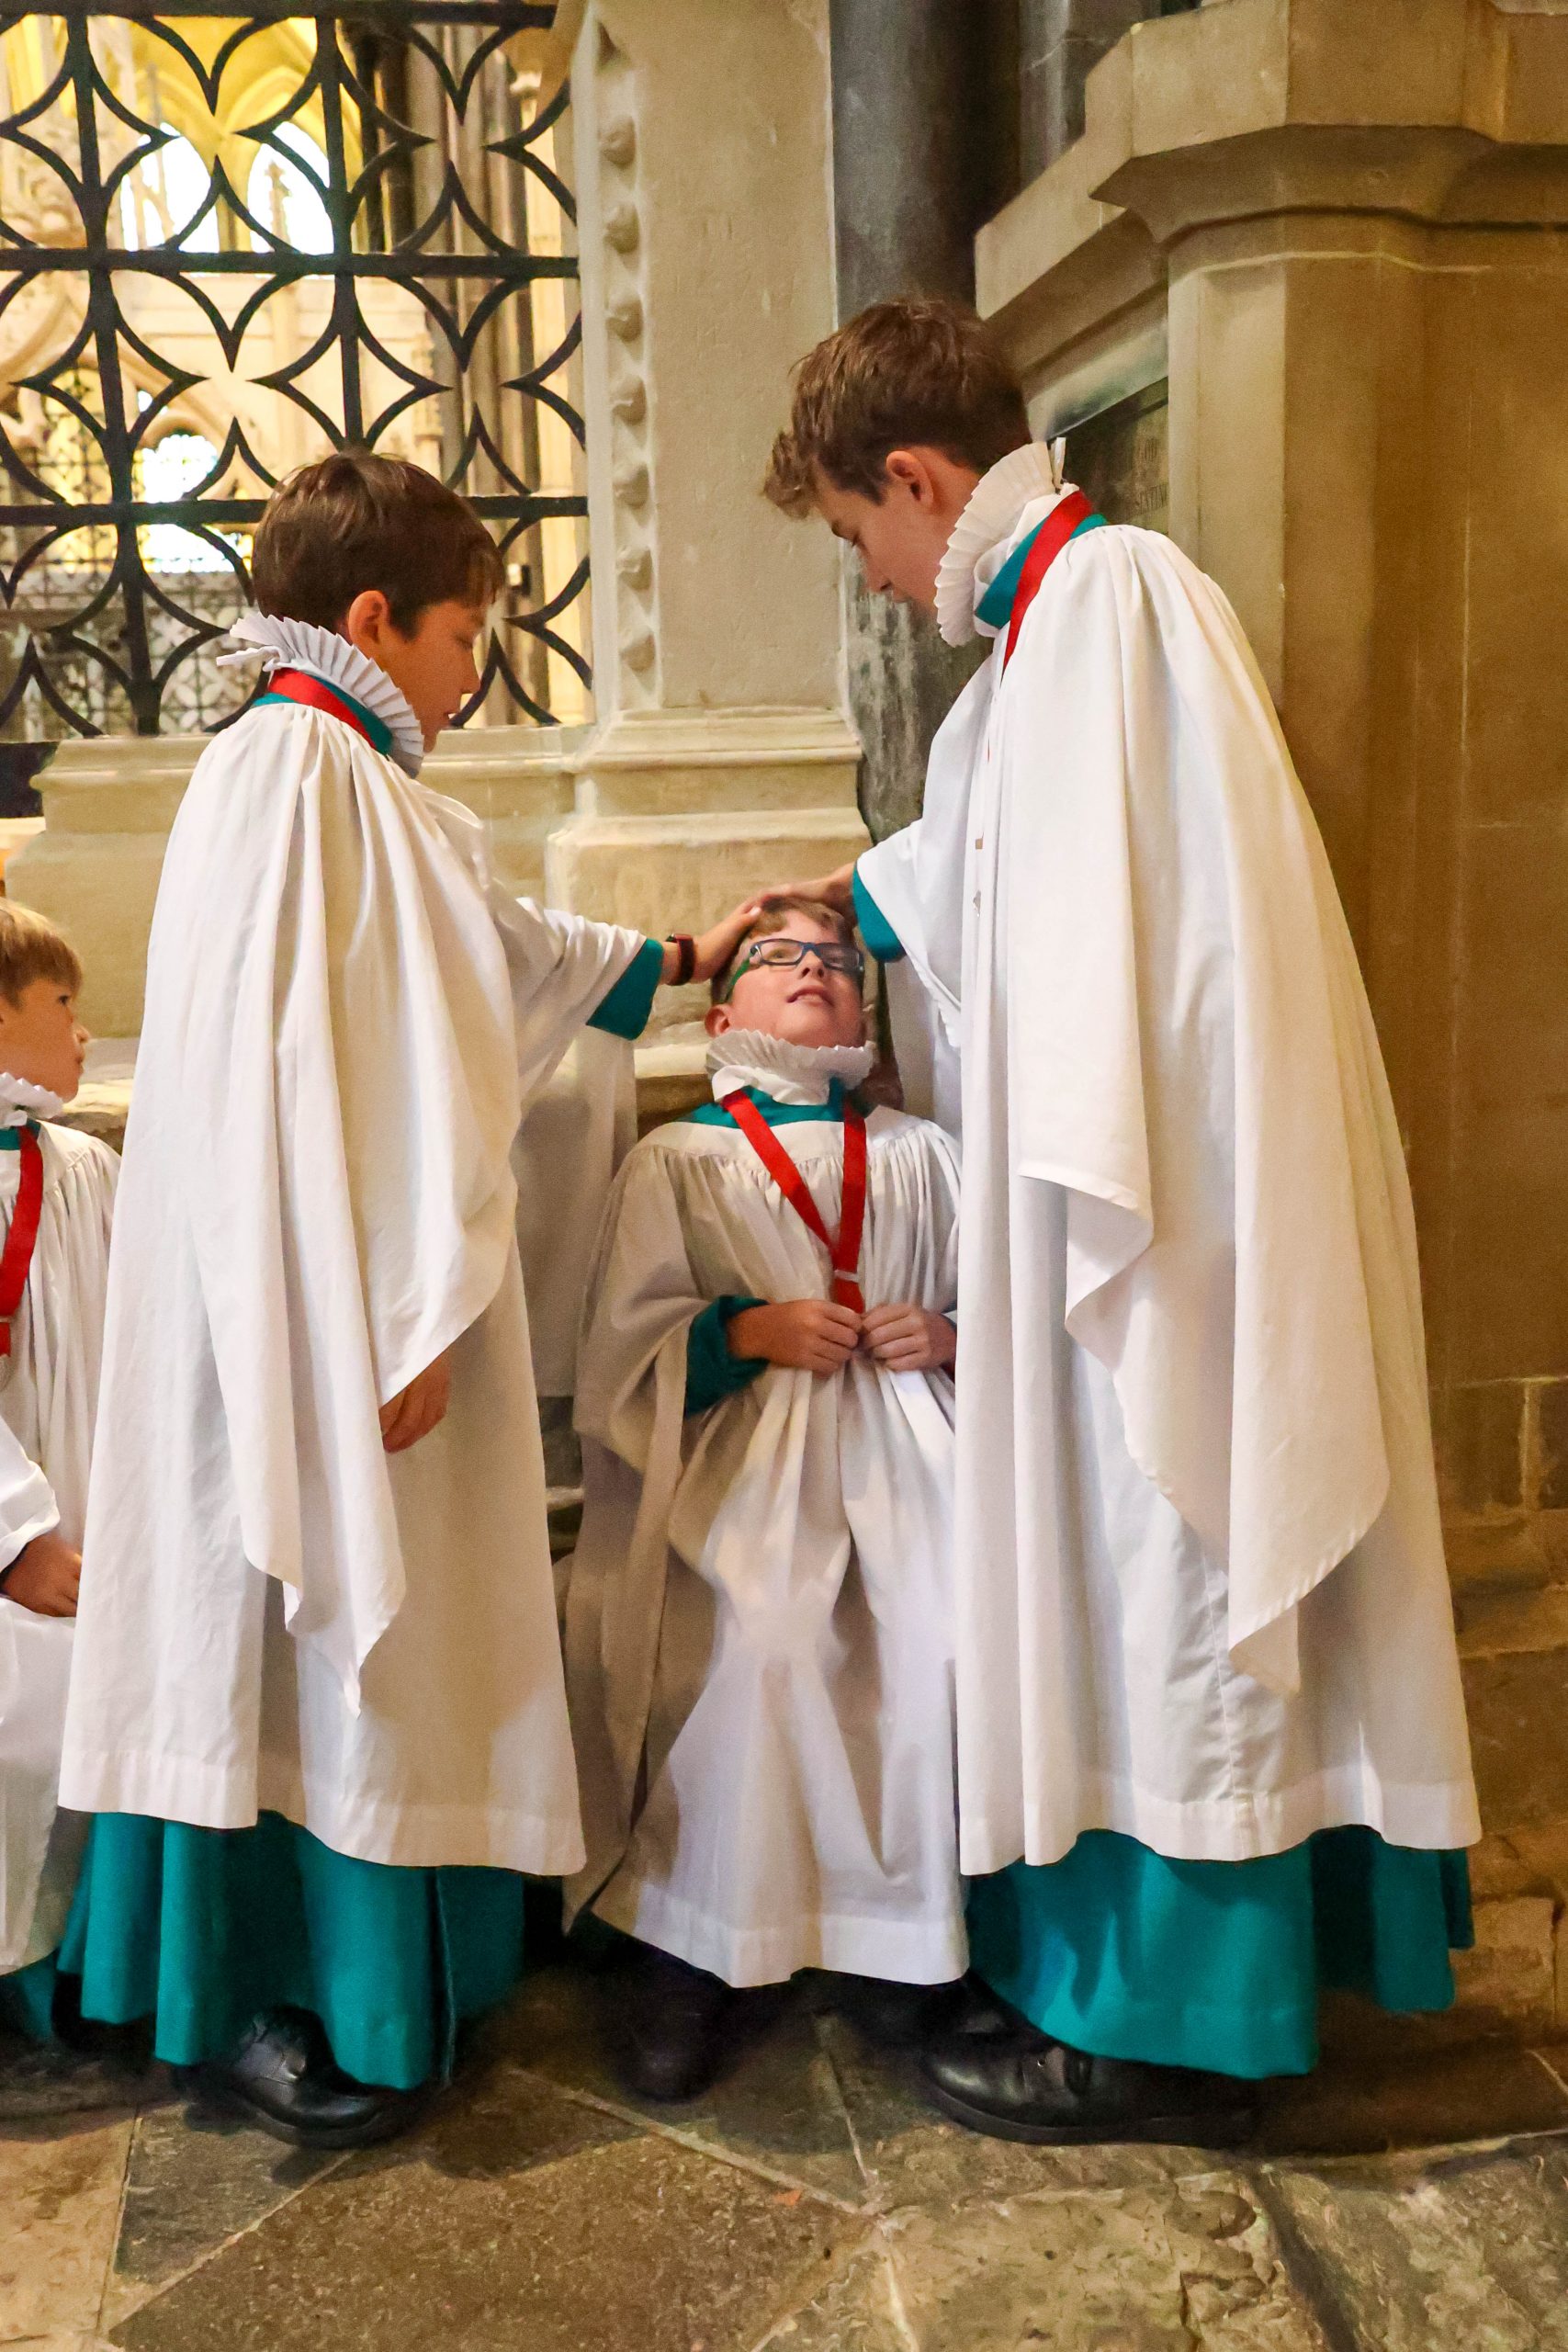 Celebrating new boy and girl choristers with traditional ‘bumpings’